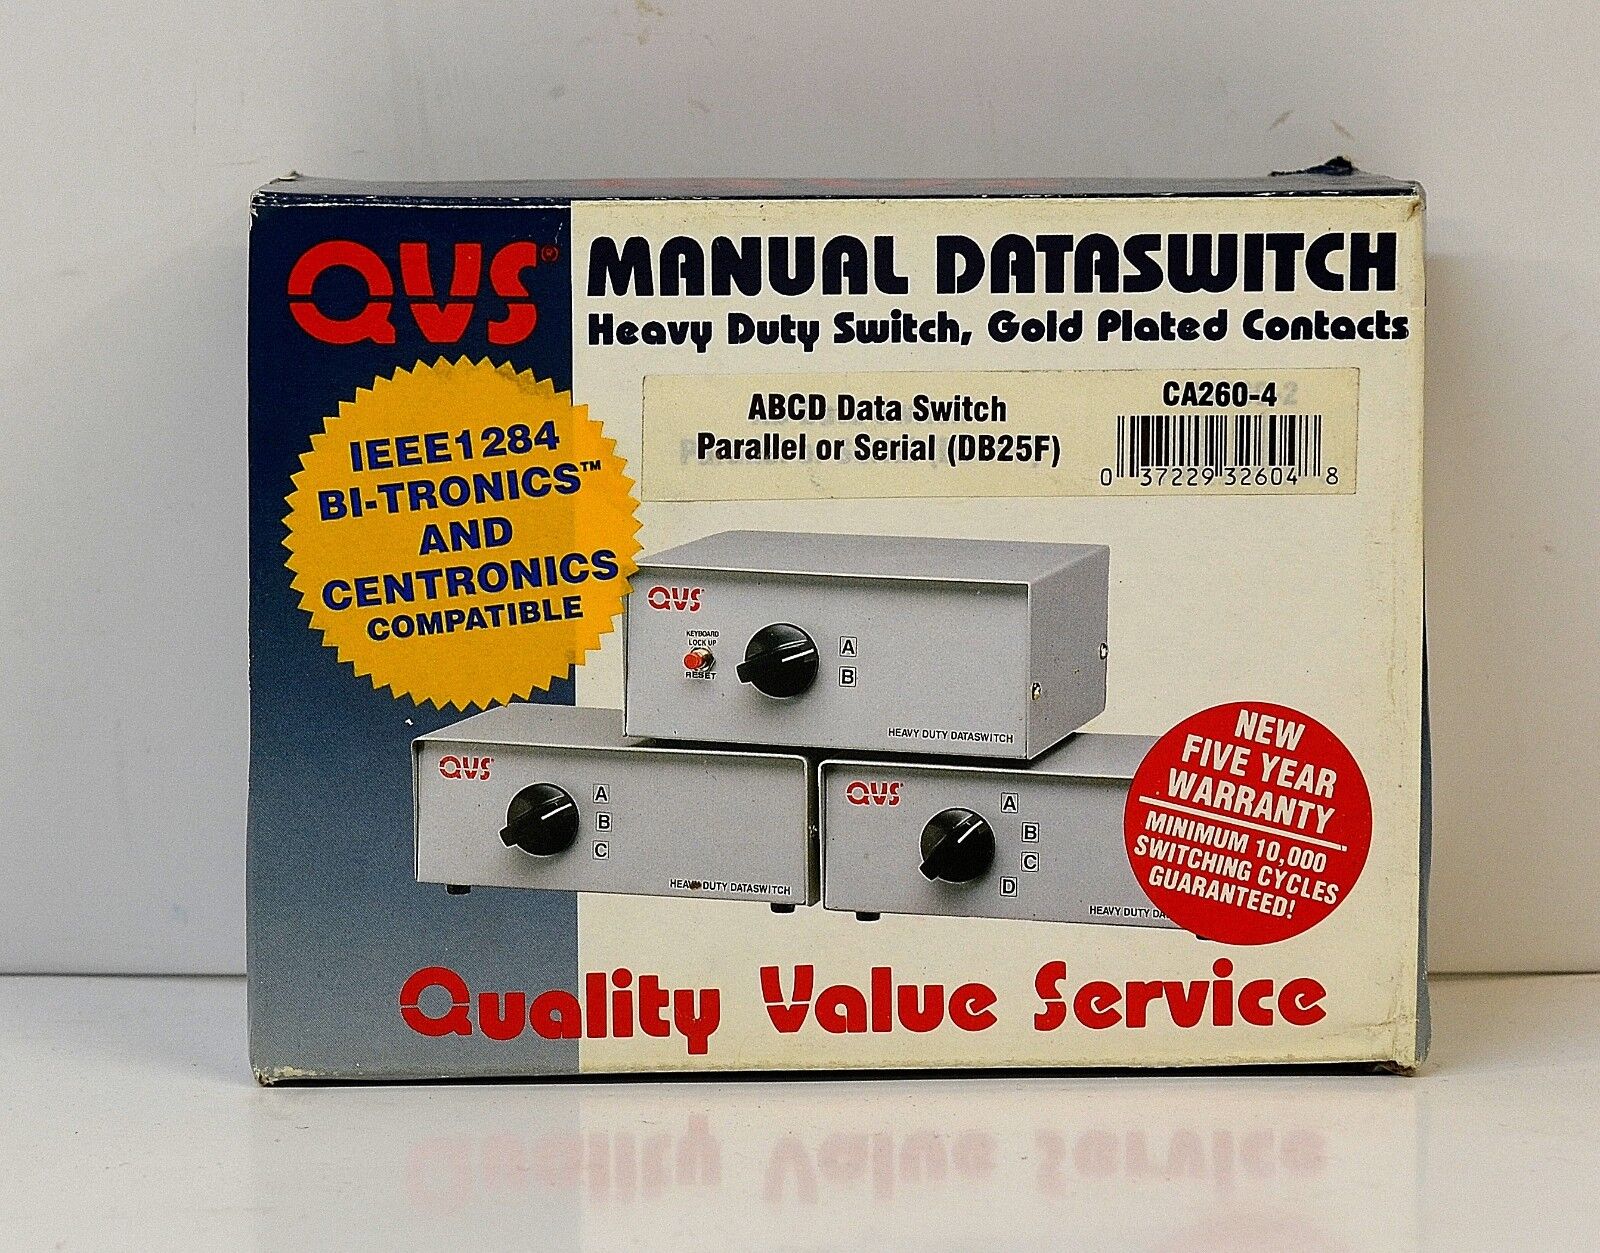 QVS MANUAL DATA SWITCH MODEL NUMBER CA260-4 4 way DATA SWITCH